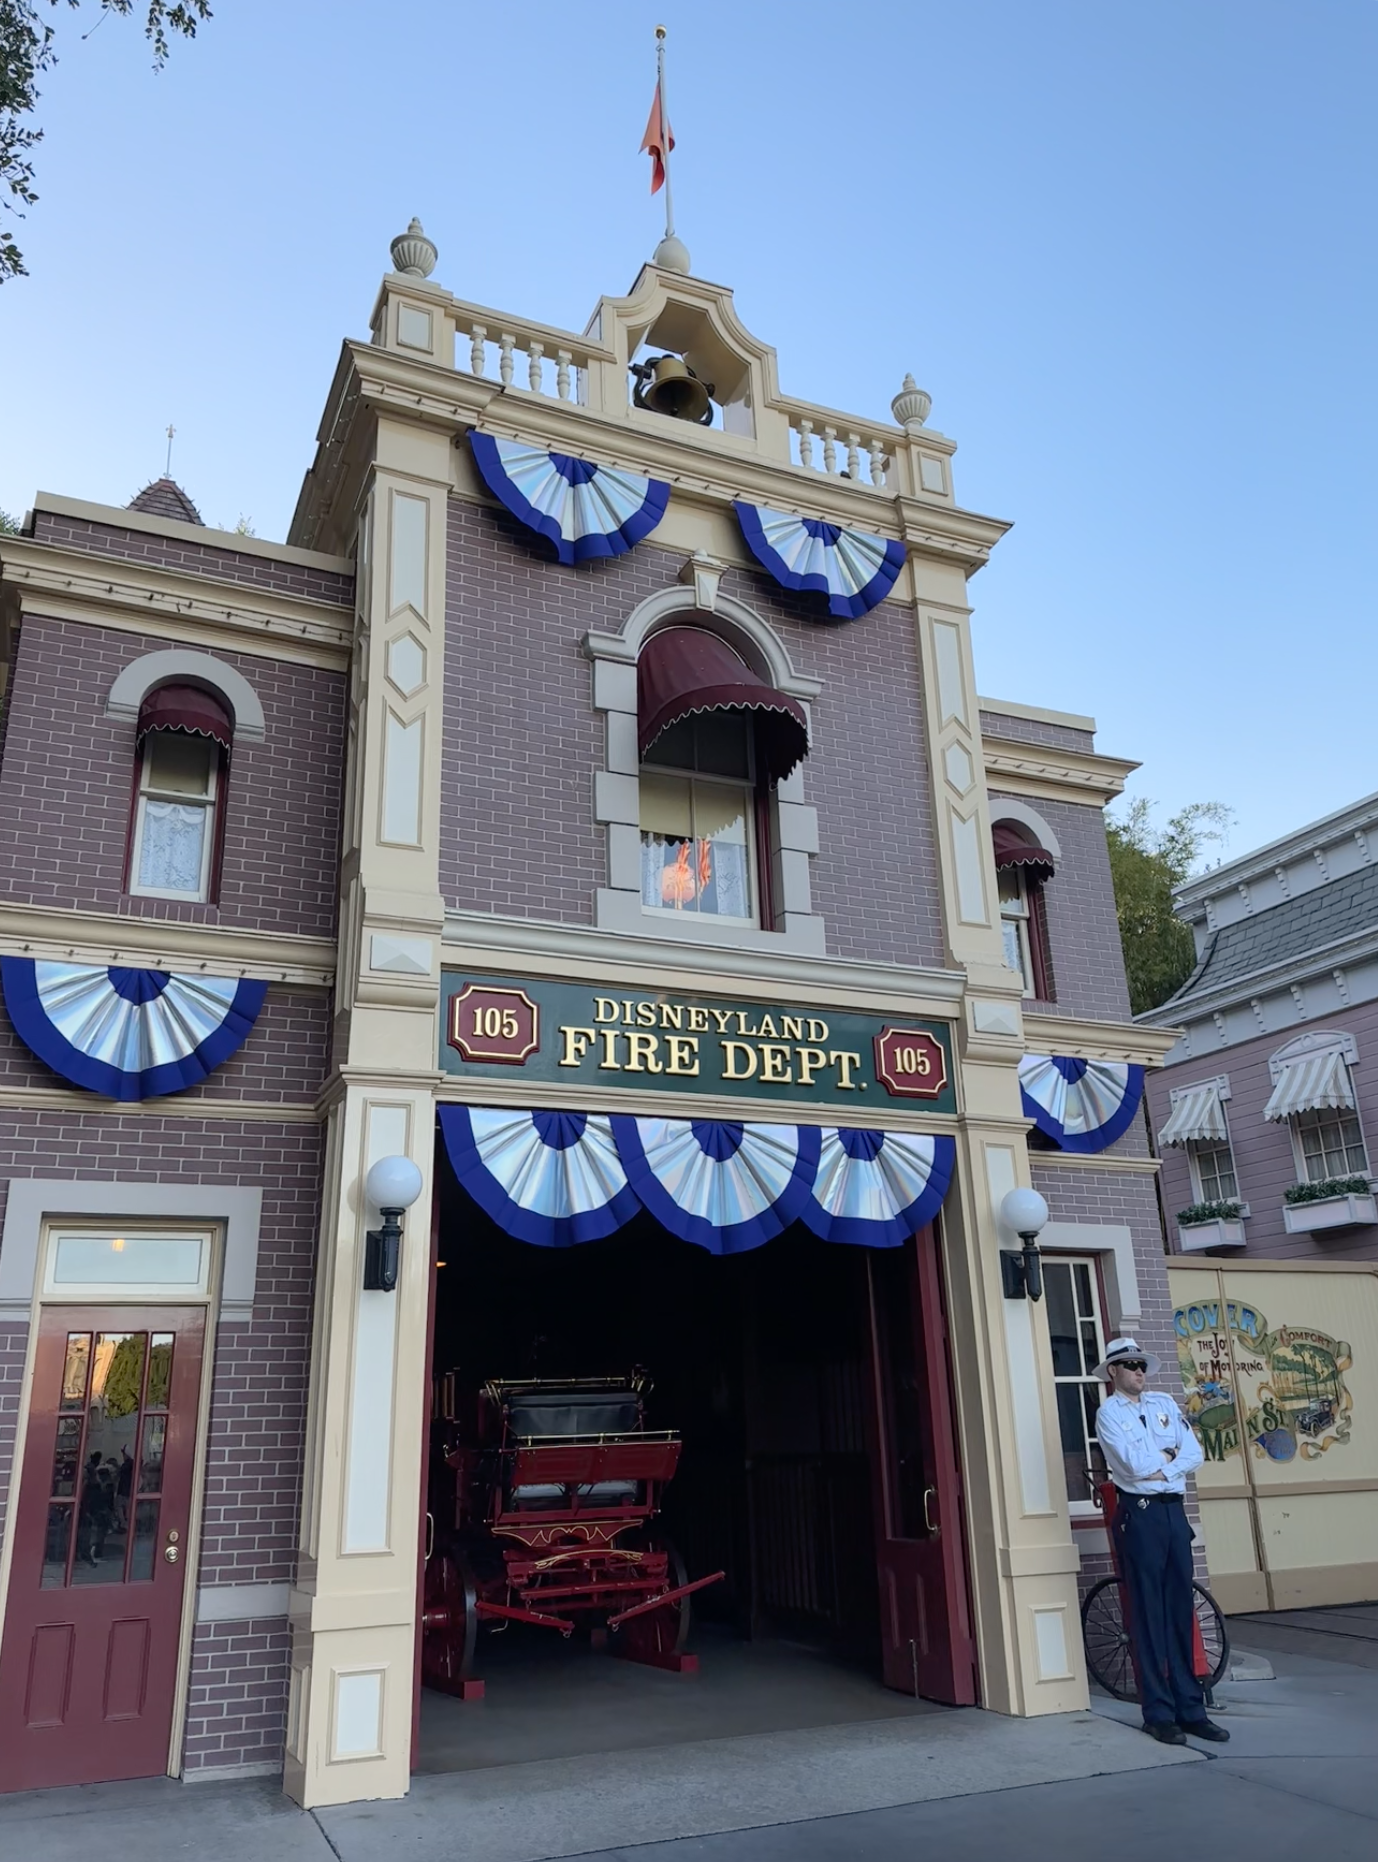 A photo of the Disneyland Fire Department